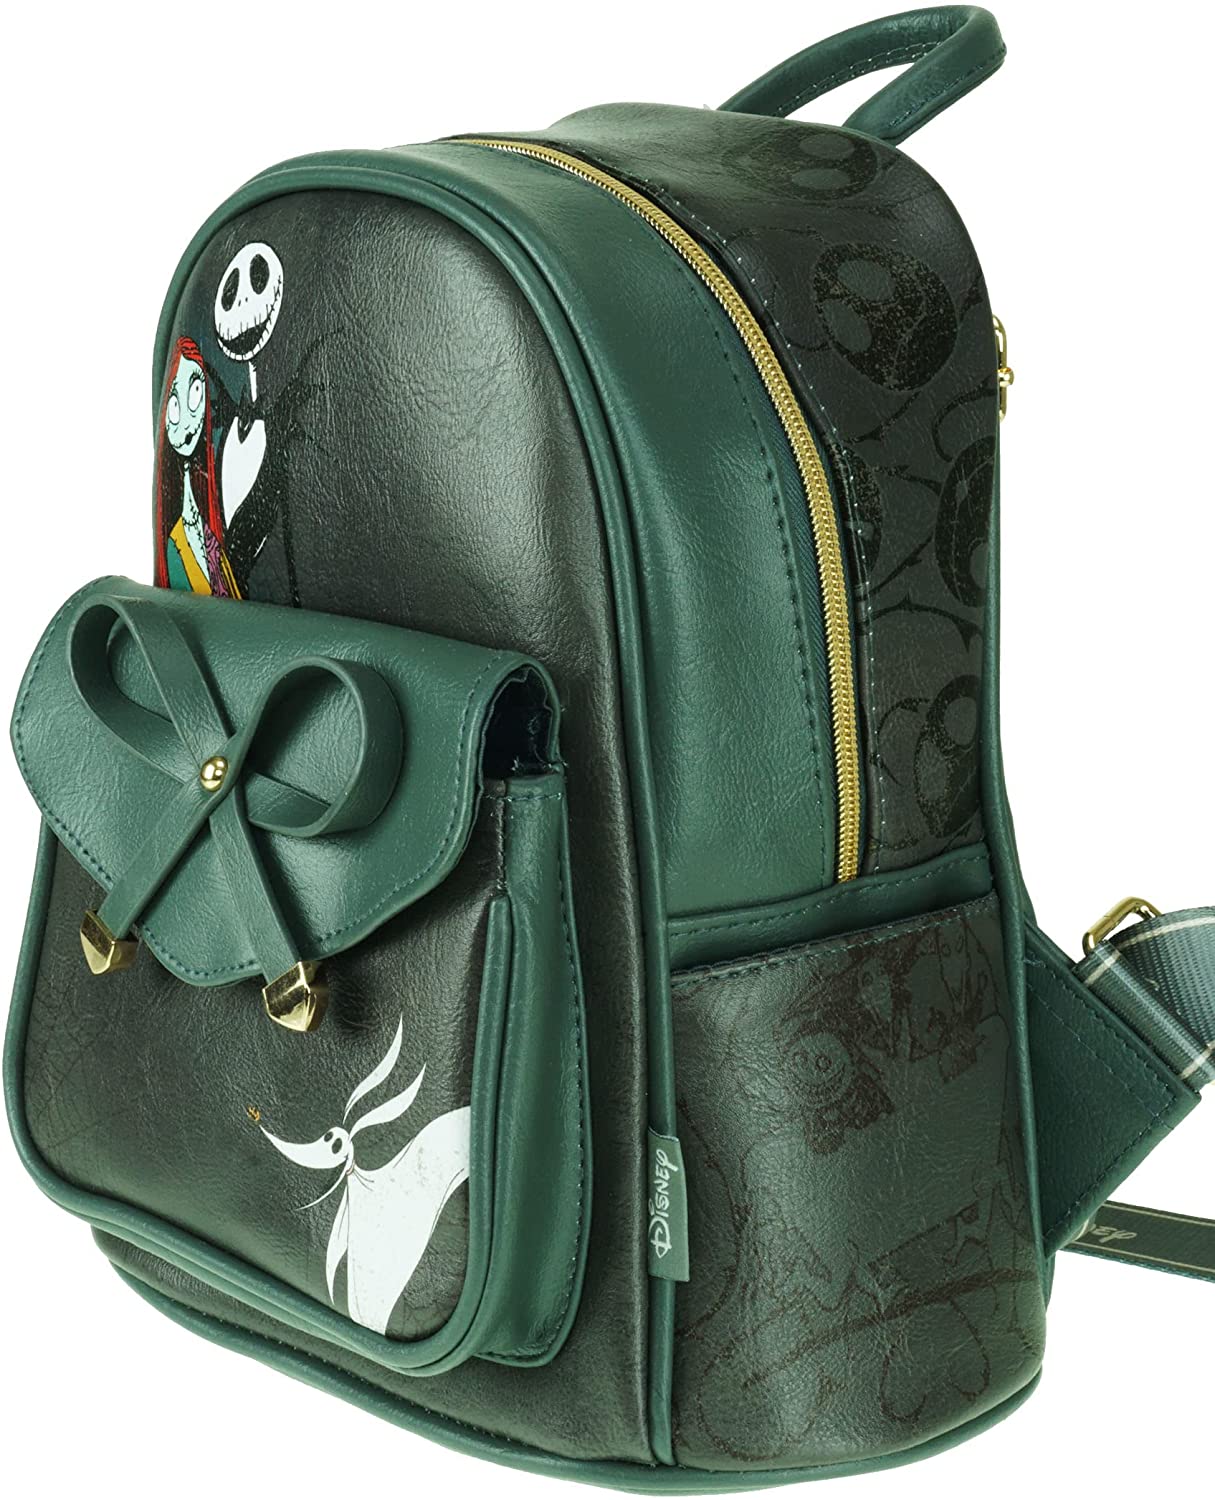 Nightmare Before Christmas 11" Vegan Leather Mini Backpack - A21765 - GTE Zone